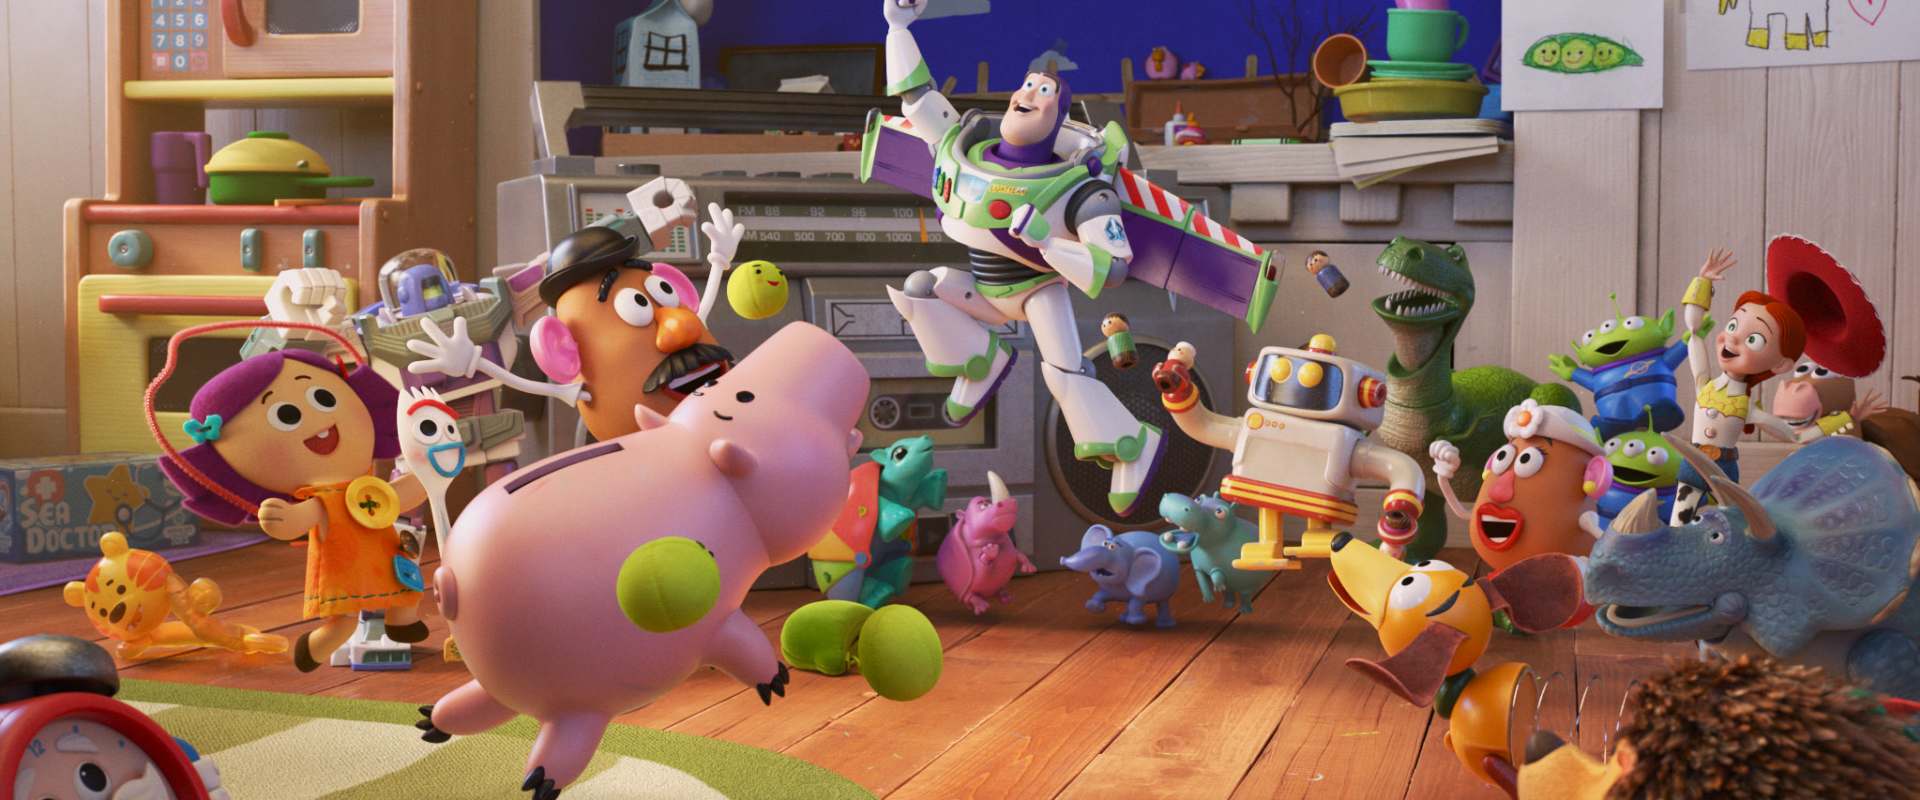 Toy Story 4 background 1